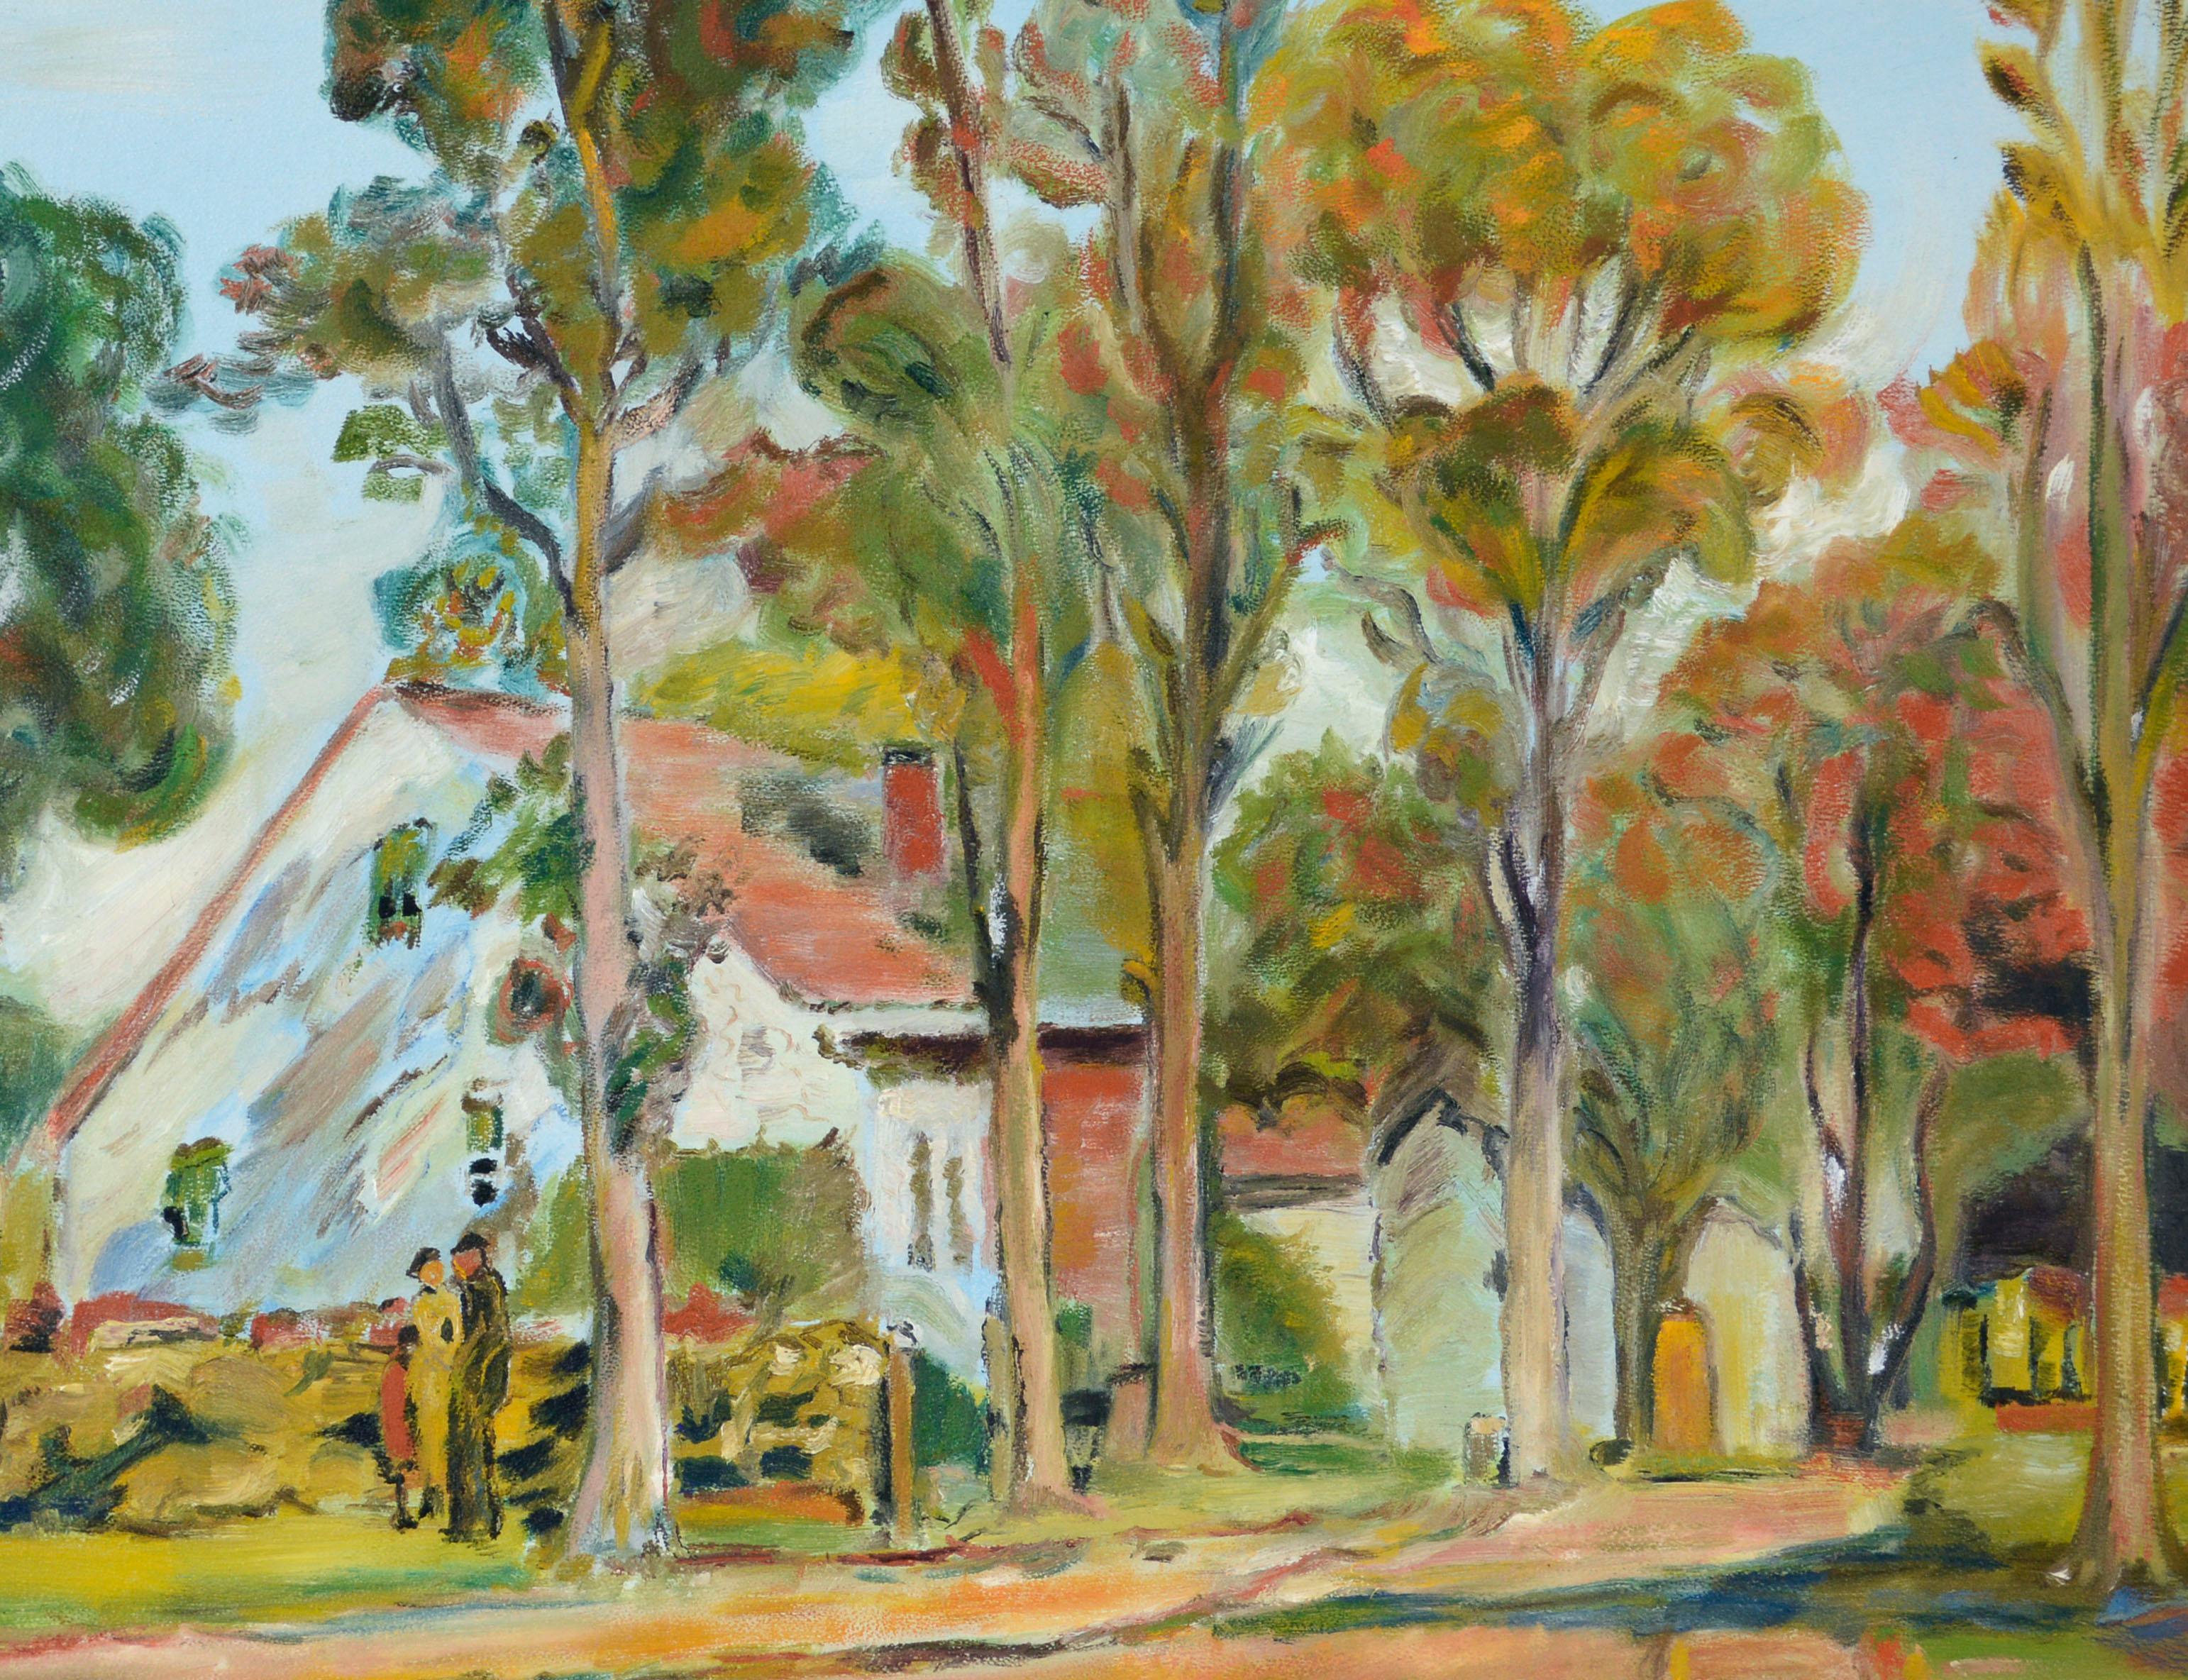 Early 20th Century Street with Trees & Houses, Fauvist Figurative Landscape  - Painting by Unknown